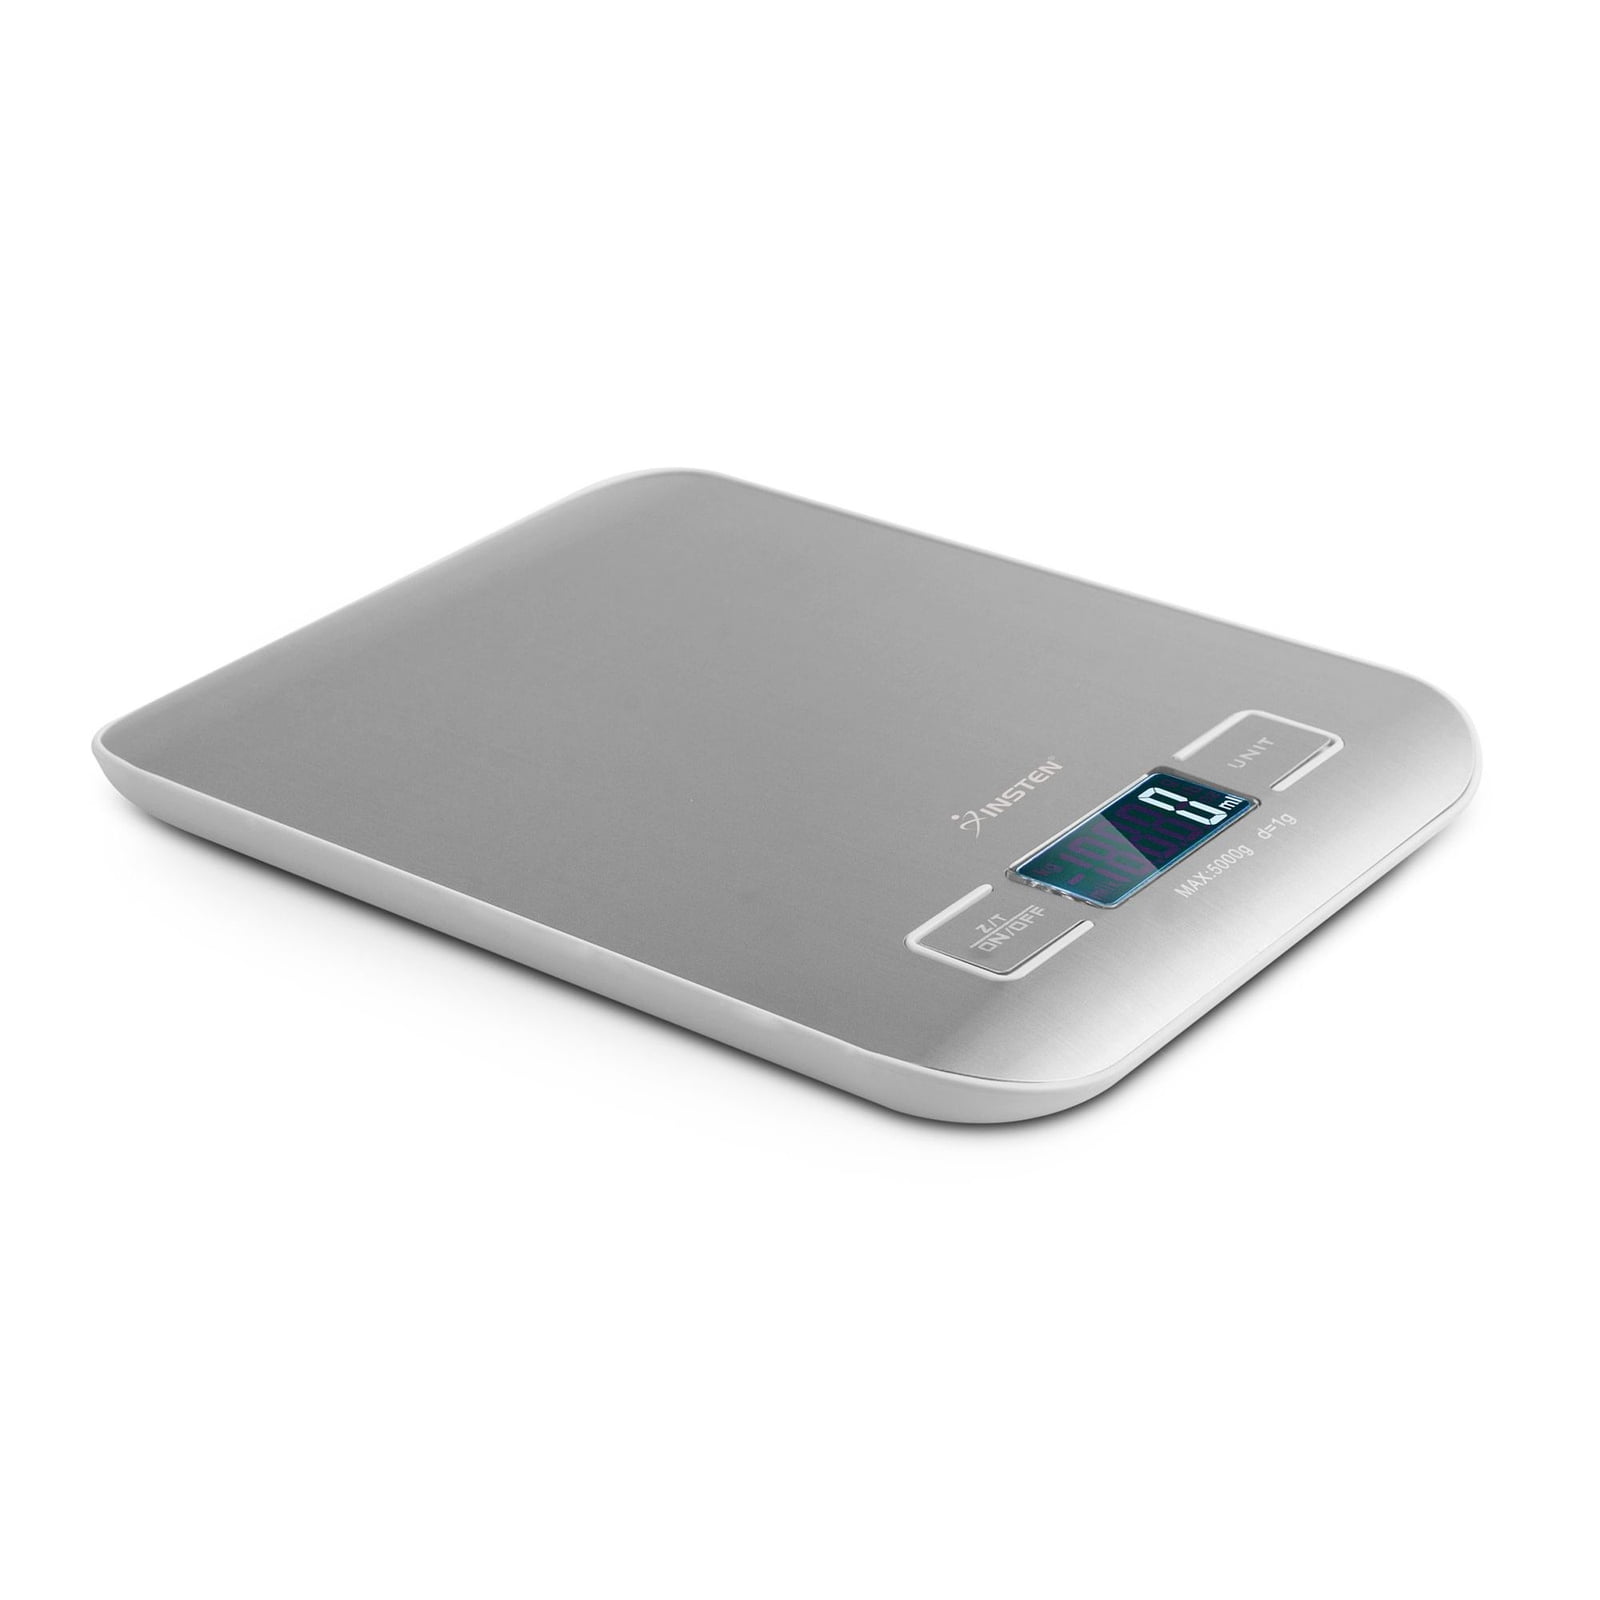 INNOVKITCHEN Kitchen Food Scale, Digital Food Scales for Kitchen Cooking  Small Scale, Kitchen Scales Digital Weight Grams and Ounces, Portable Food